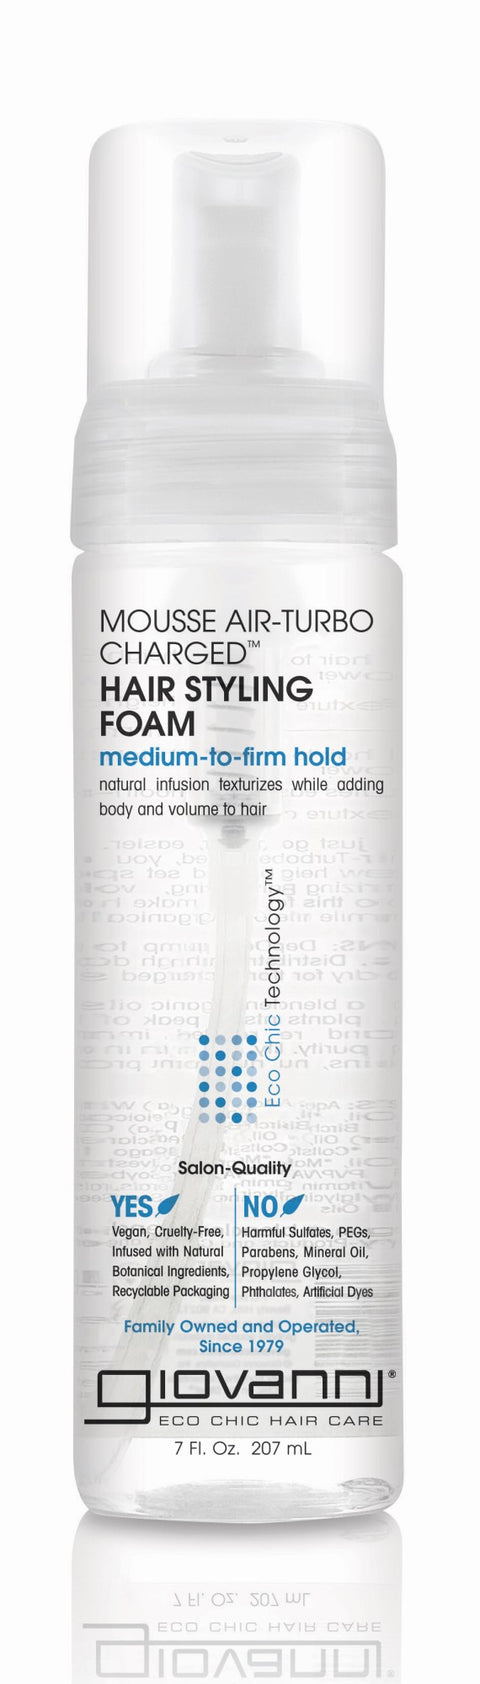 Giovanni Mousse Air-Turbo Charged Hair Styling Foam